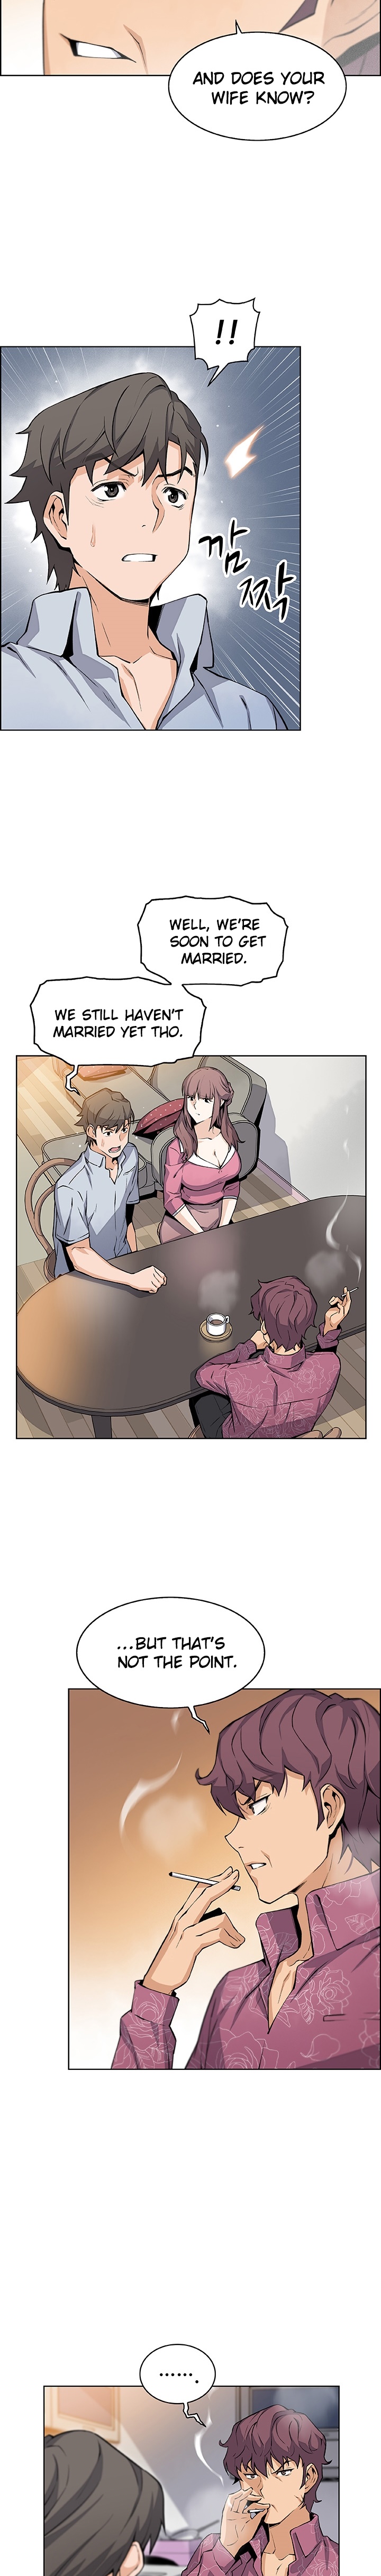 Housekeeper Manhwa - Chapter 27 Page 7